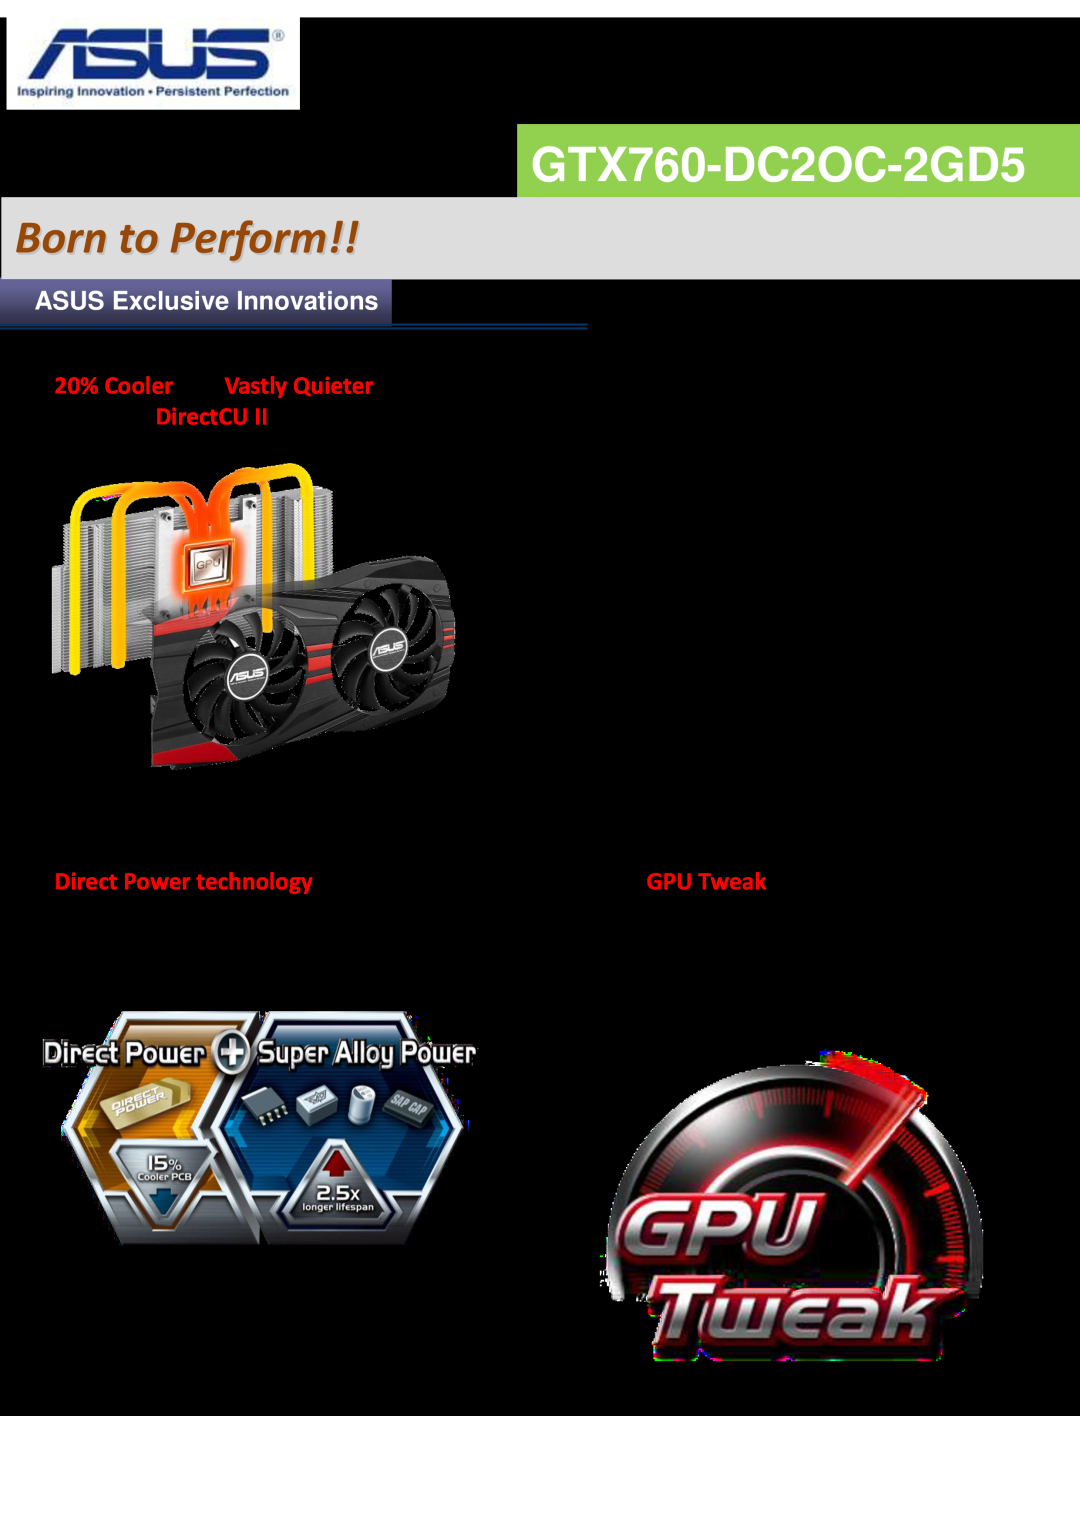 Asus GTX760DC2OC2GD5 manual ASUS Exclusive Innovations, GTX760-DC2OC-2GD5, Born to Perform 